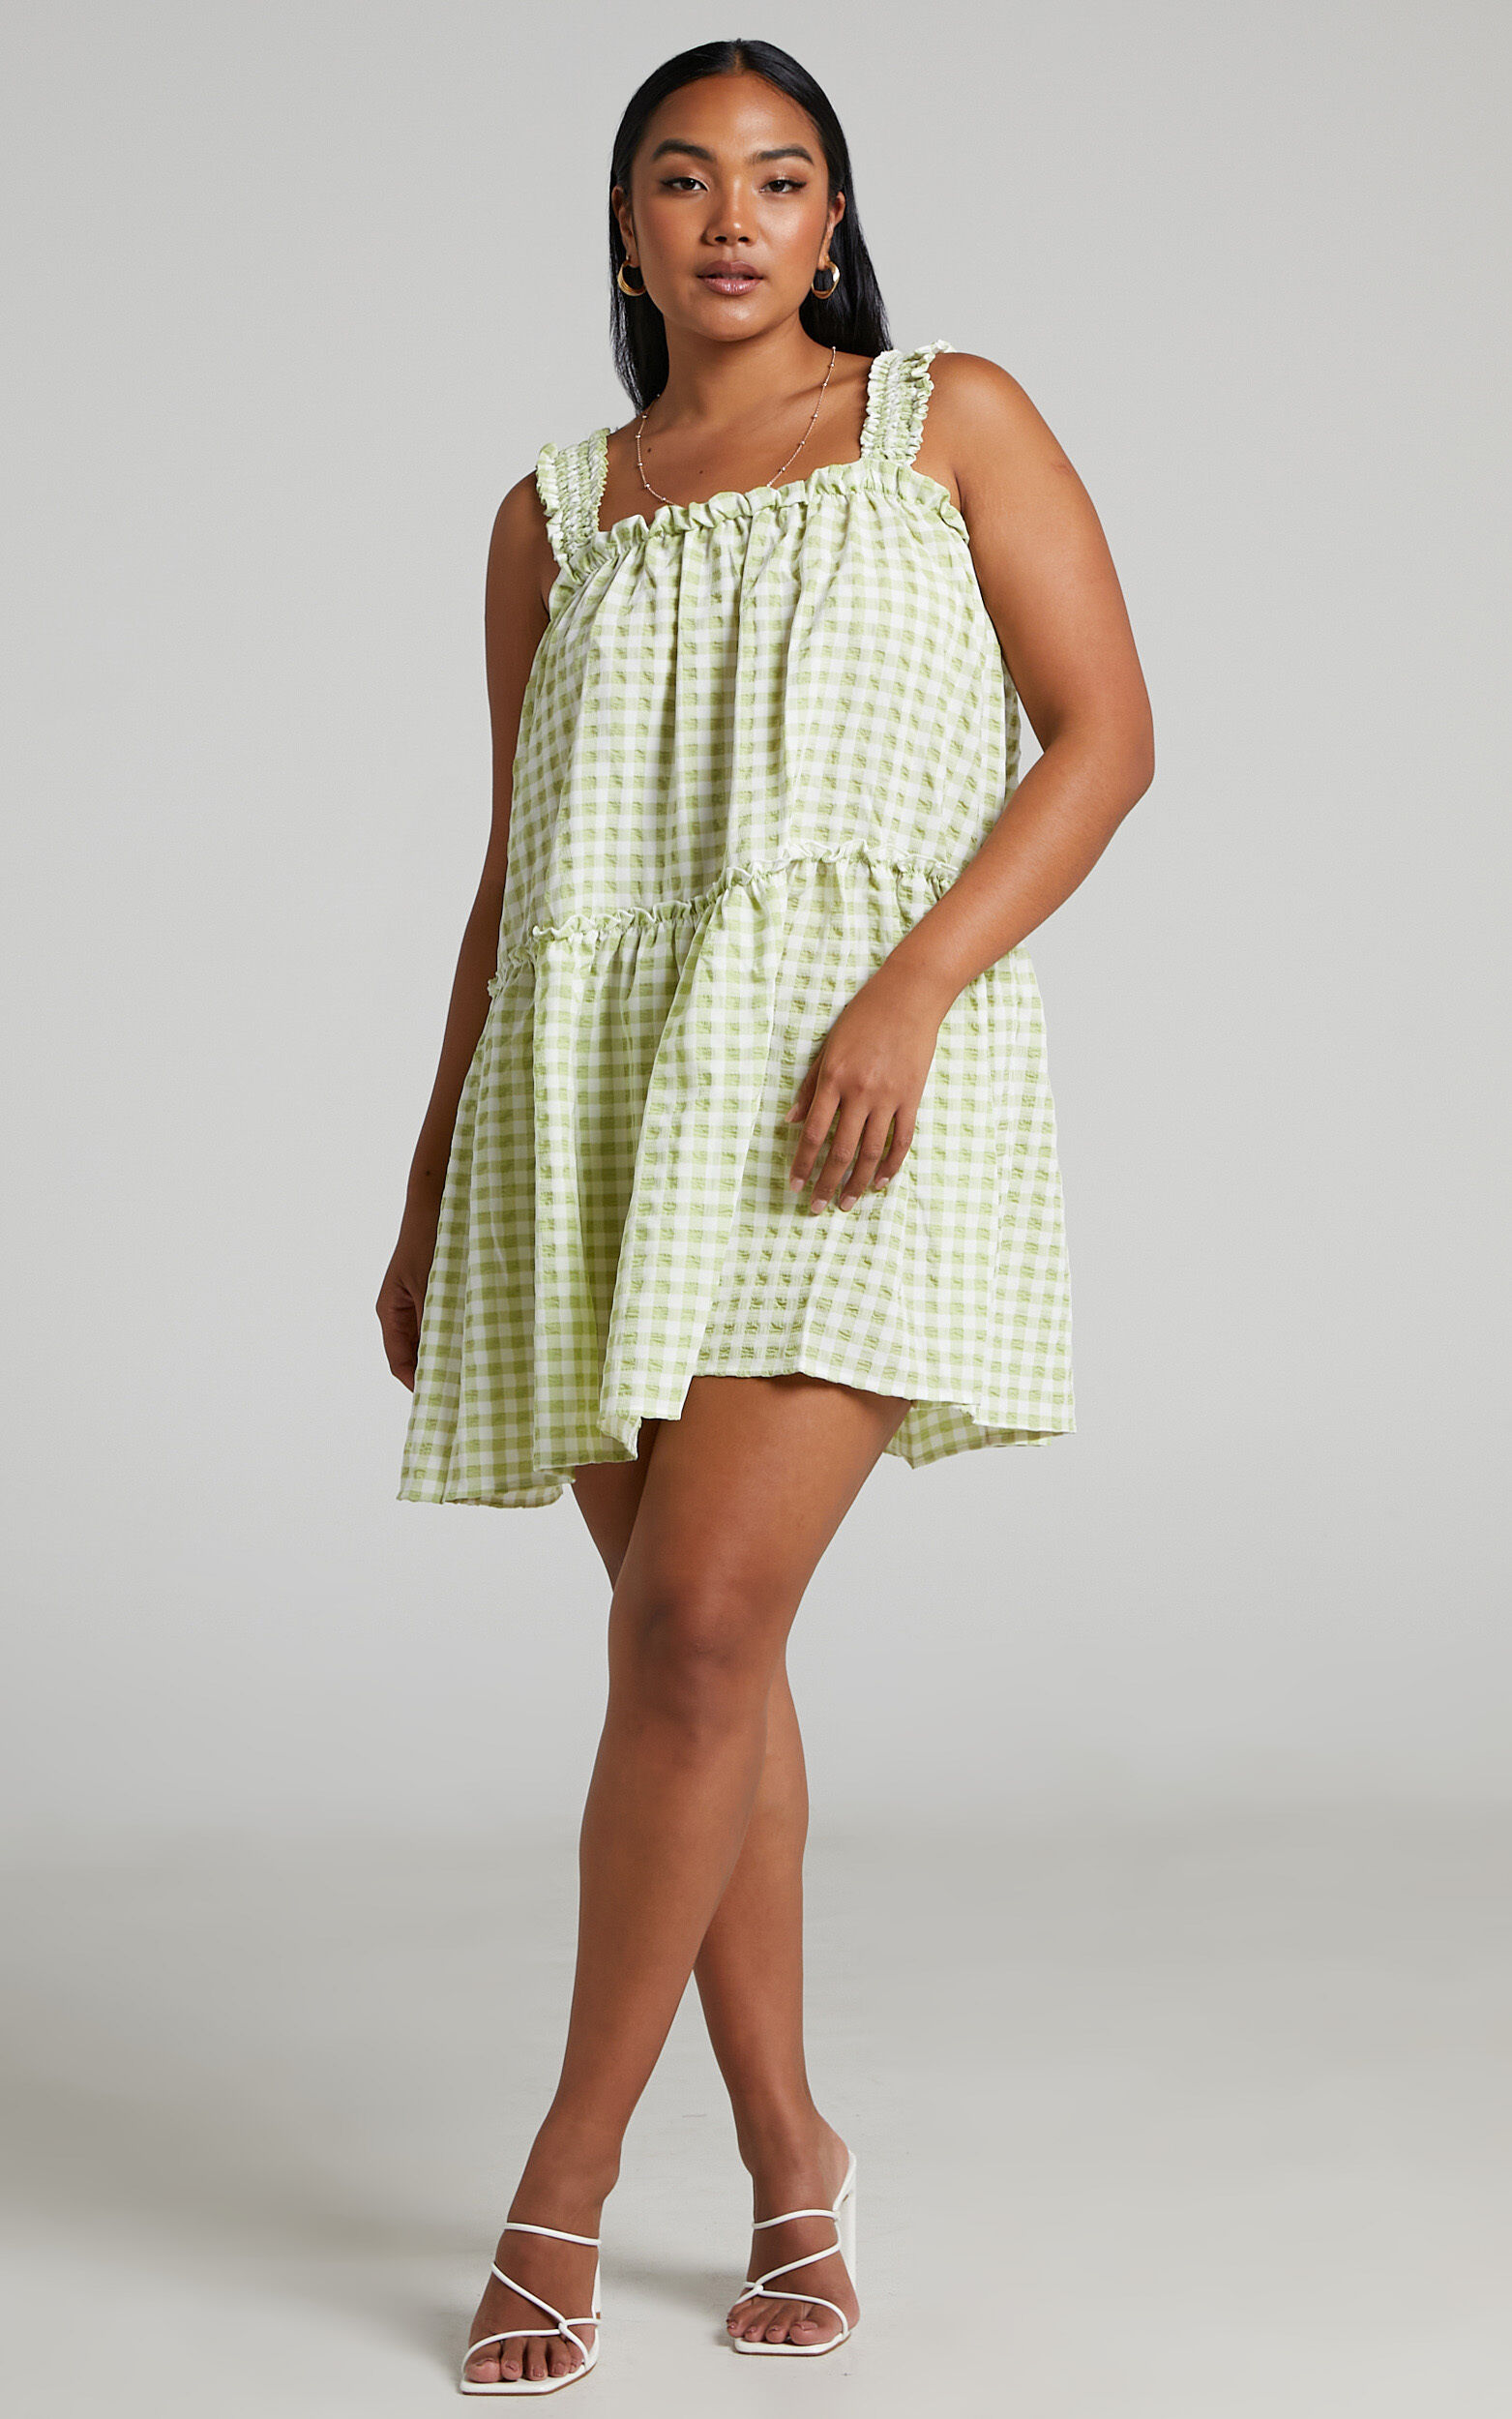 Meldzie Gingham Tiered Mini Dress in Meldzie Lime Gingham - 06, GRN1, super-hi-res image number null